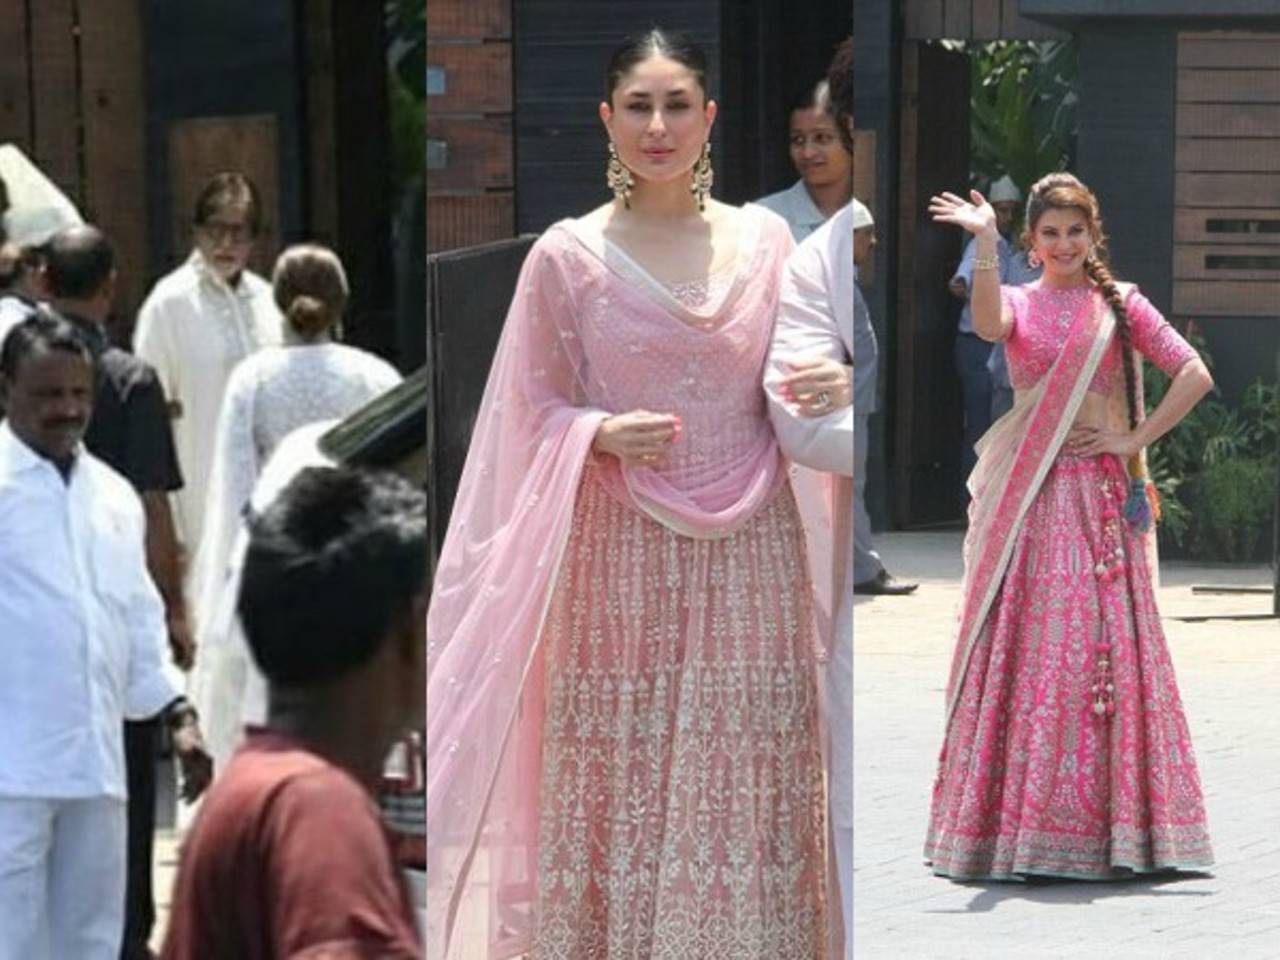 Sonam Kapoor wedding pics, marriage photos, Sonam Kapoor - Anand Ahuja marriage Amitabh Bachchan, Kareena Kapoor Khan, Jacqueline Fernandez and others attend the big day  pic